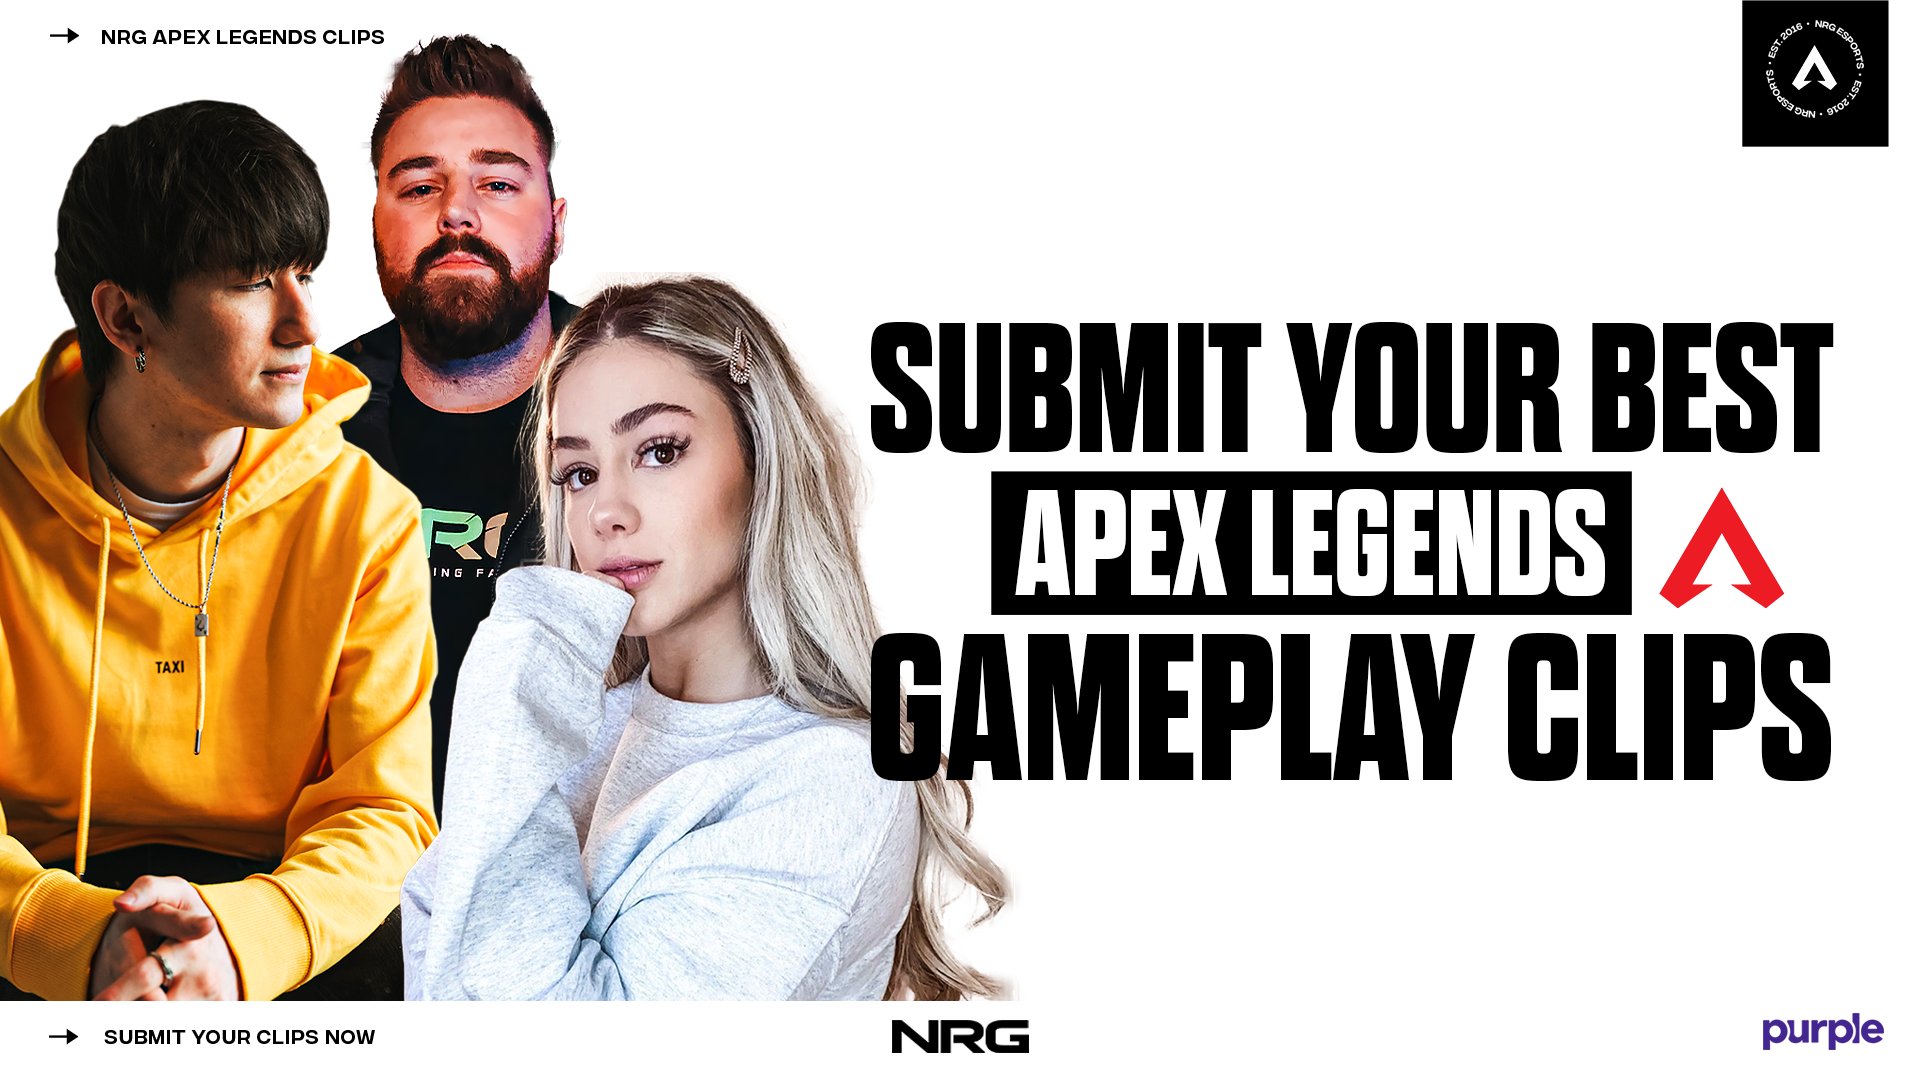 Nrg The Nrg Apex Squad Acesu Lululuvely Ttrebb Are Teaming Up With Purple To Rate To Your Best Clips Submit Your Clip T Co Whifamzgtq T Co Ukgfkyabzz Twitter